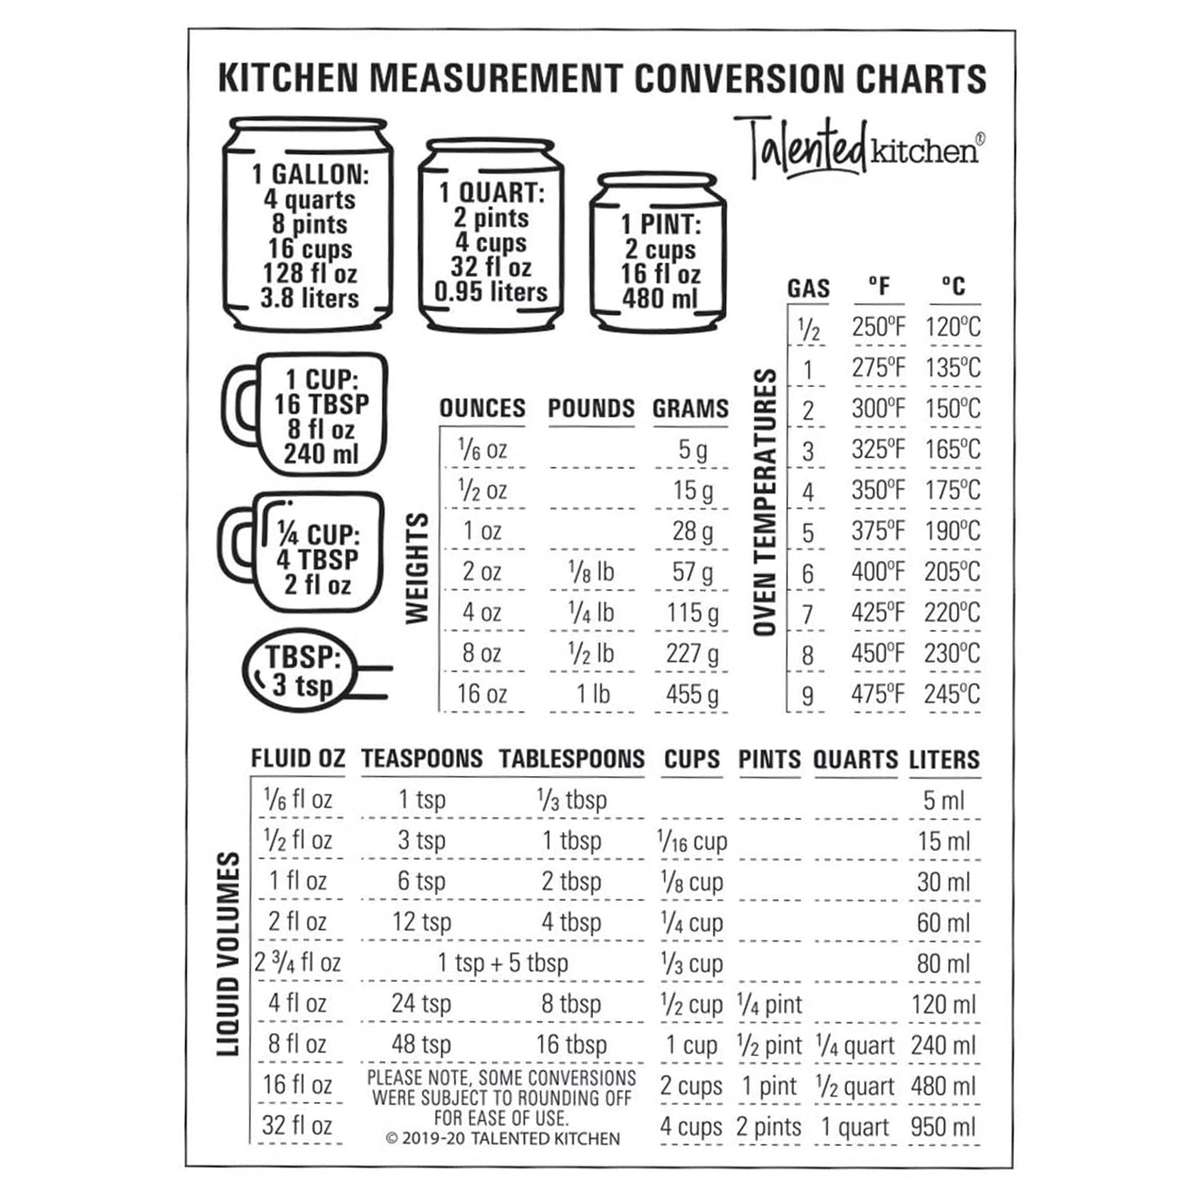 Talented Kitchen Magnetic Kitchen Conversion Chart.